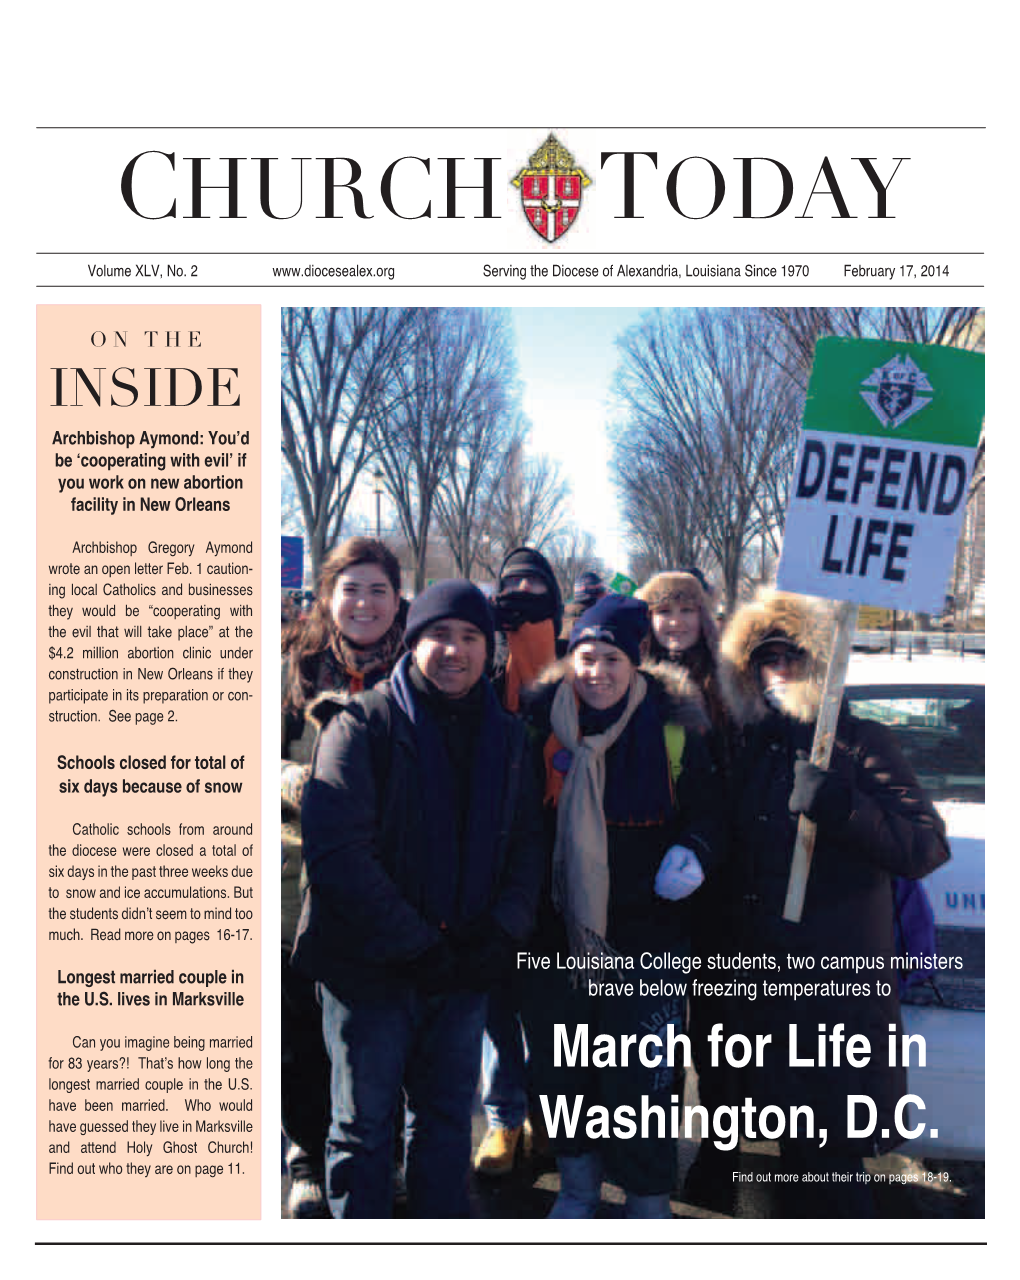 The Church Today, Feb. 17, 2014